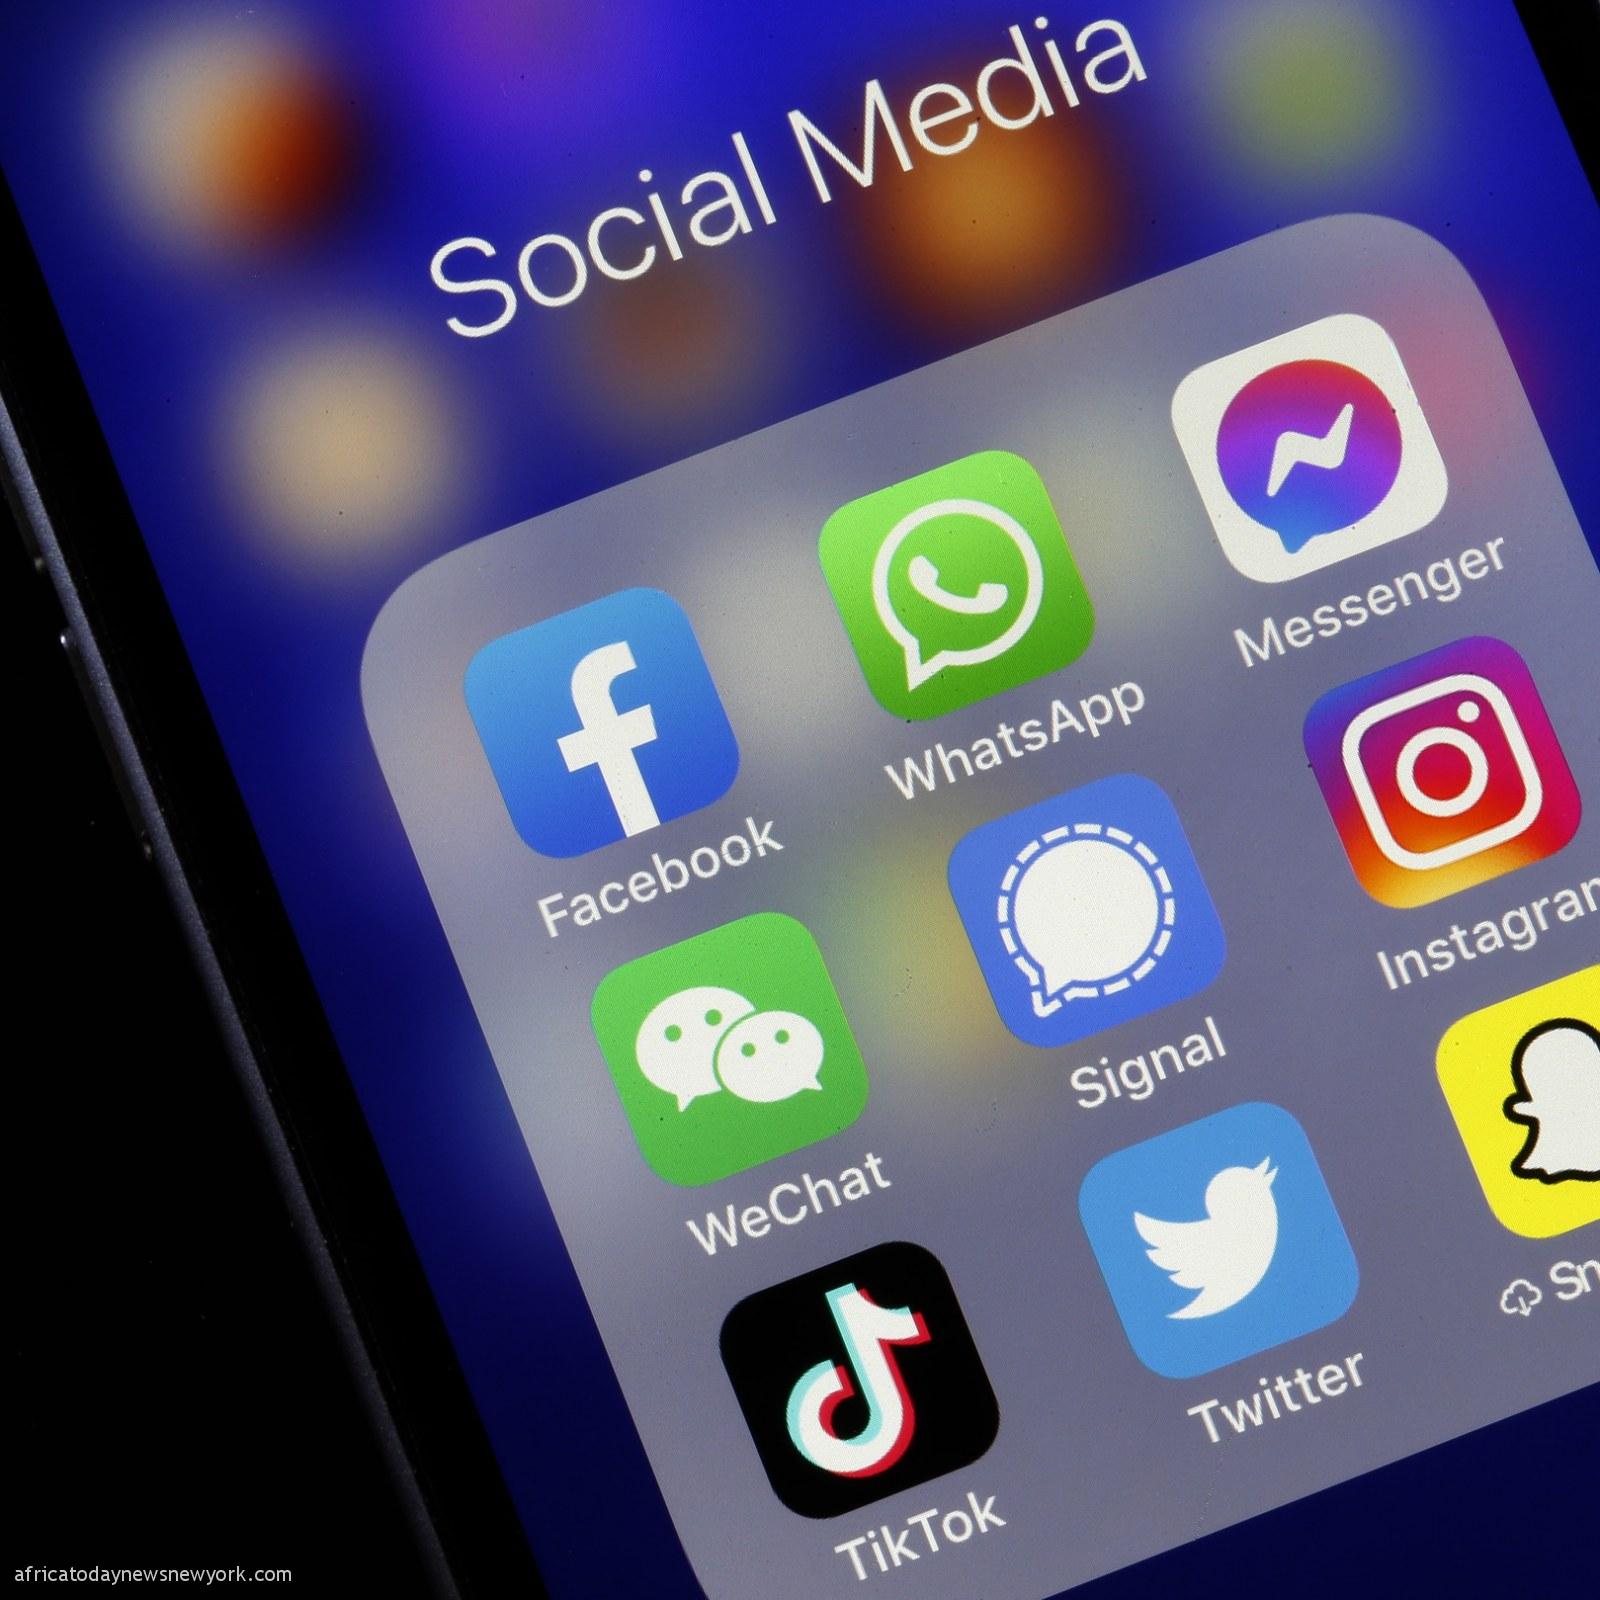 Nigeria Issues Fresh Directives To Facebook, Twitter, Others